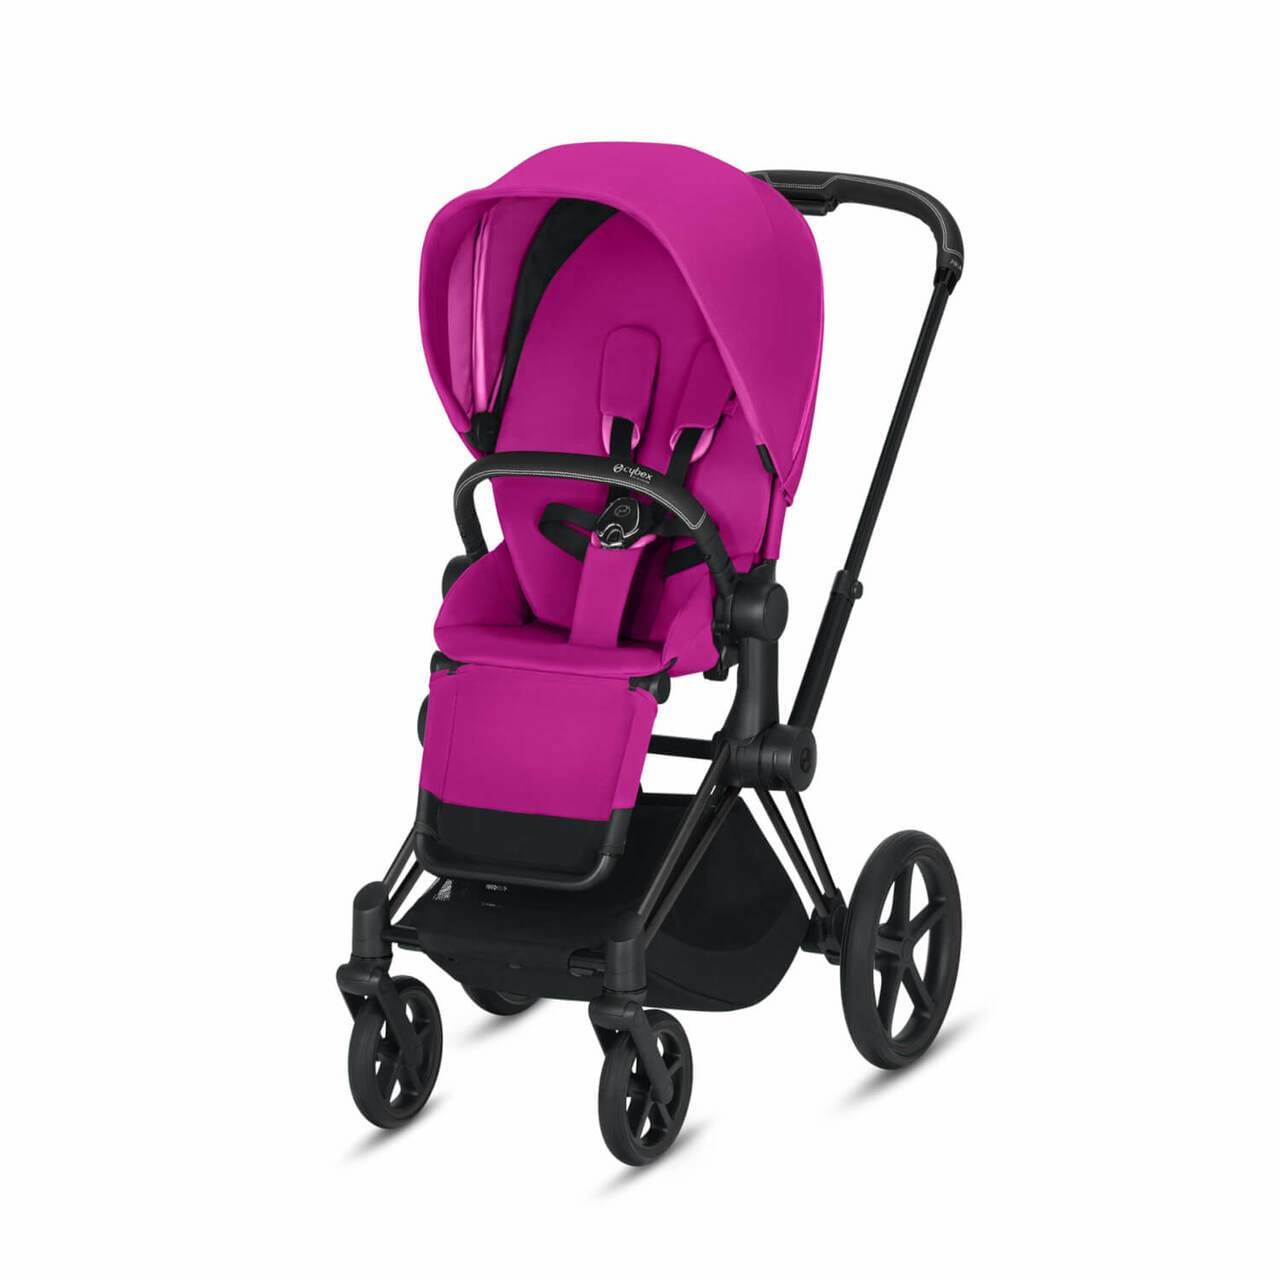 CYBEX Priam 3-in-1 Travel System Matte with Black Details Baby Stroller – Fancy Pink 519003733 4058511709963